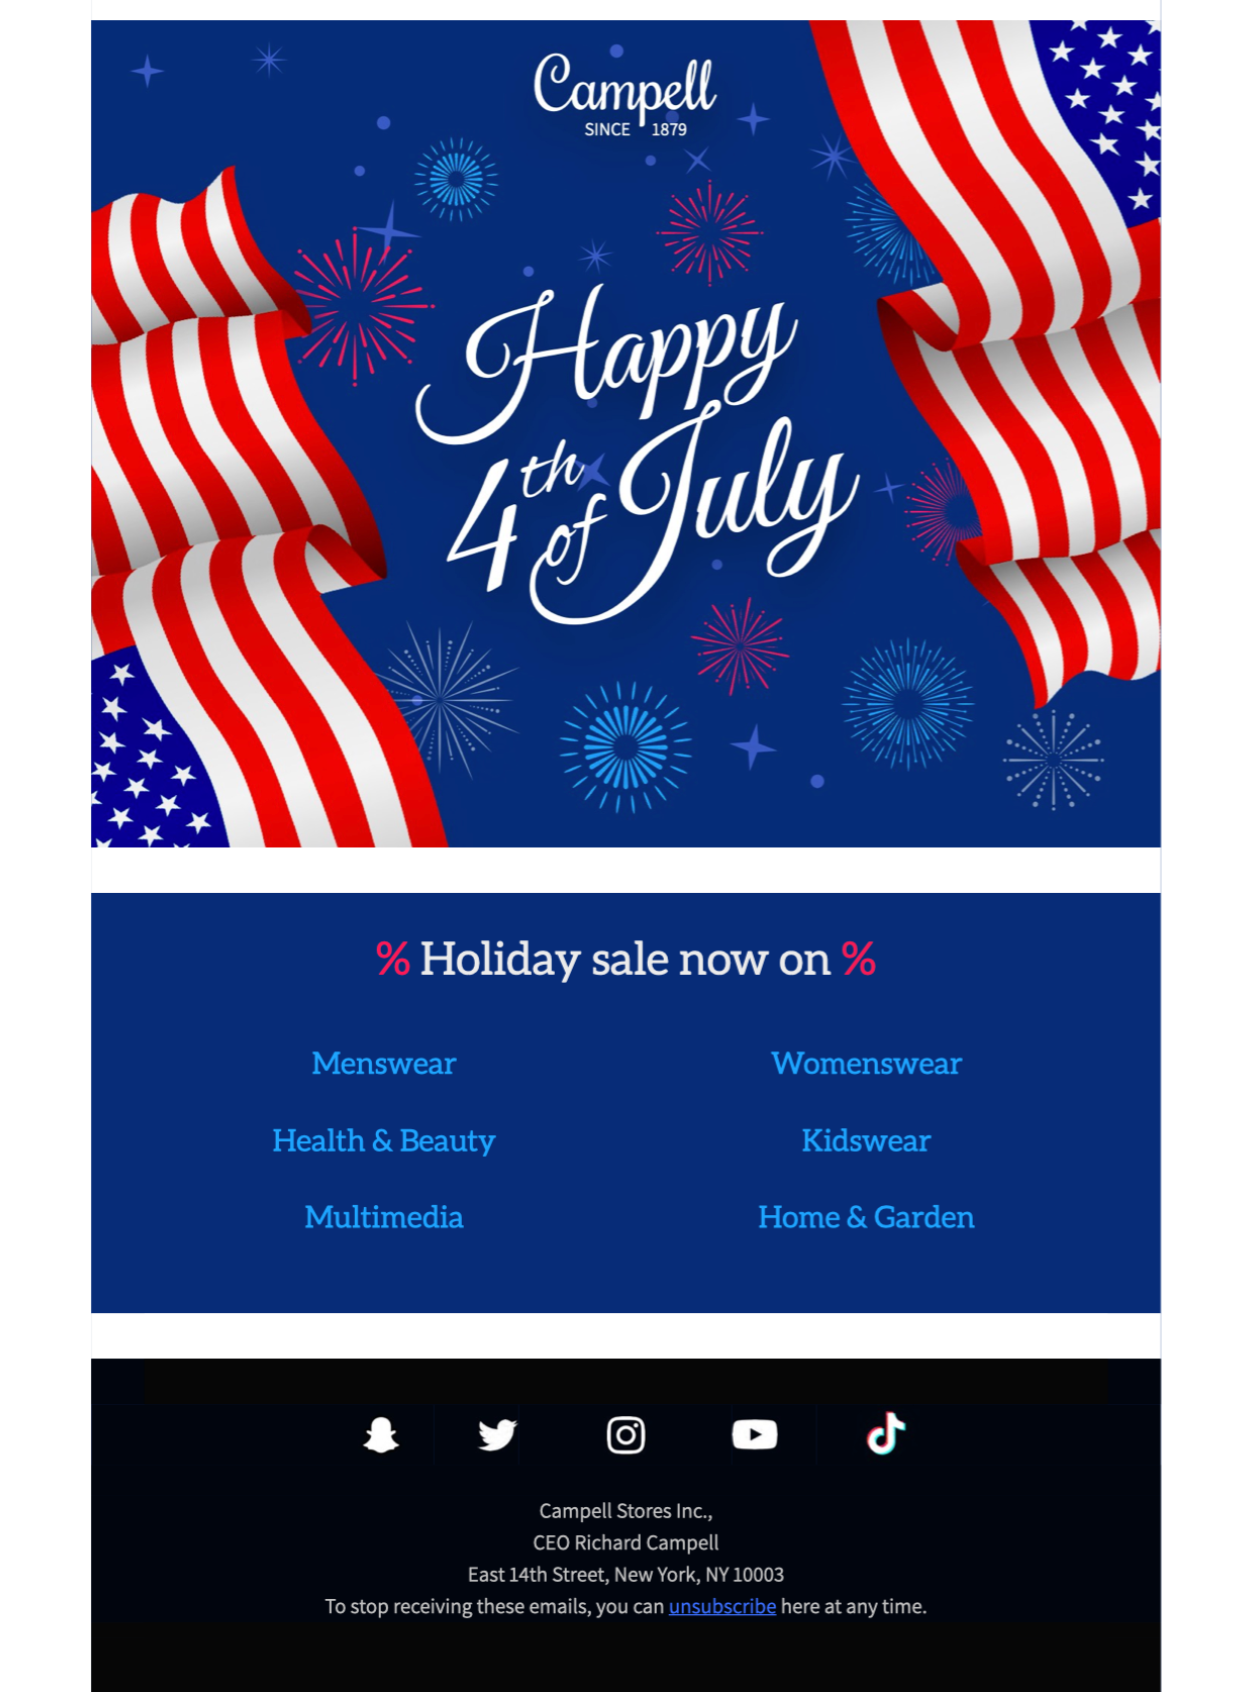 happy 4th of July html email template